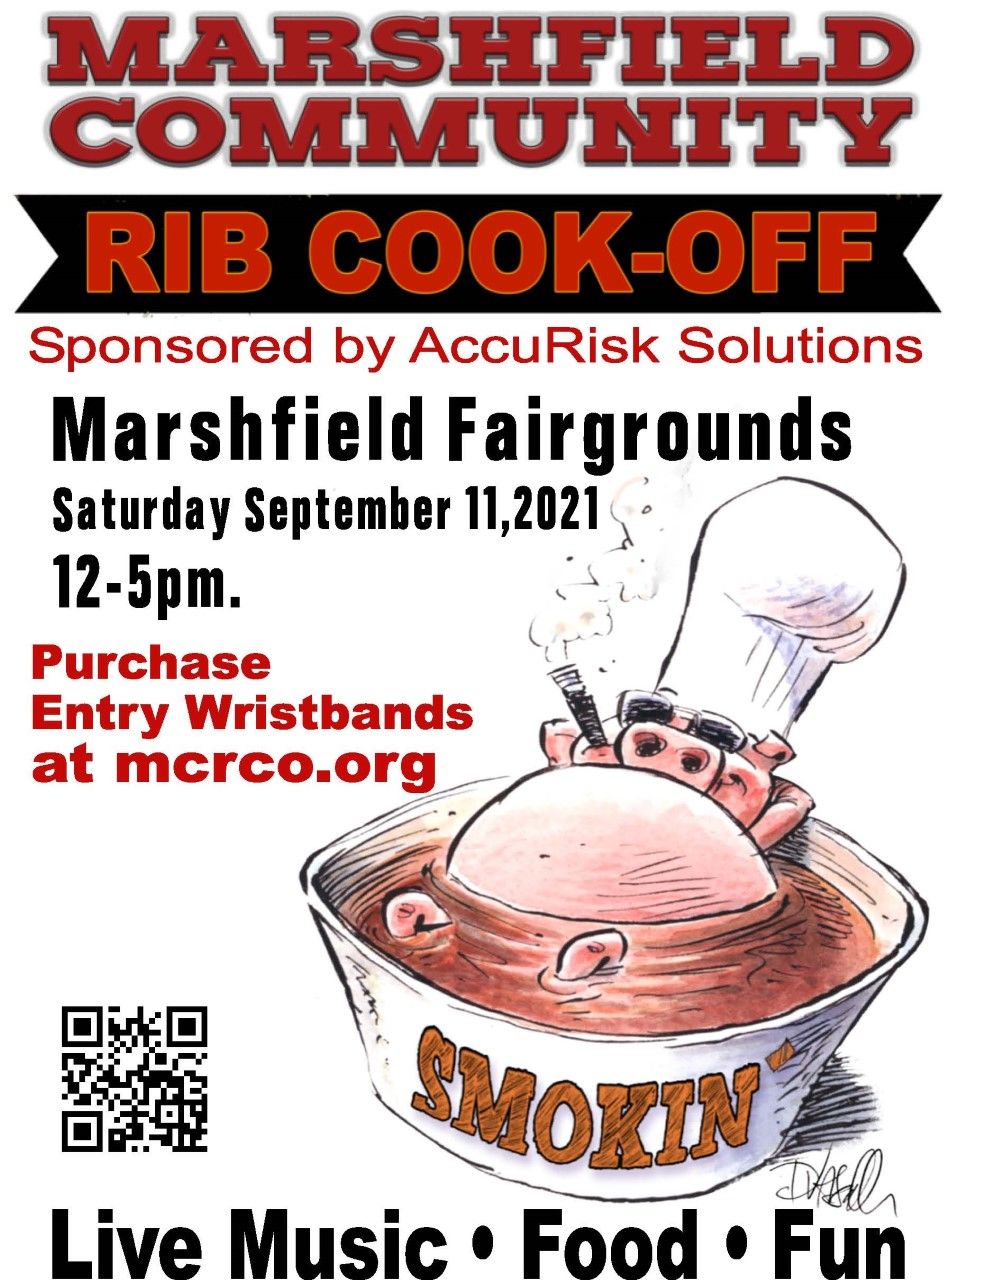 Rib CookOff 2021 at the Marshfield Fairgrounds WATD 95.9 FM